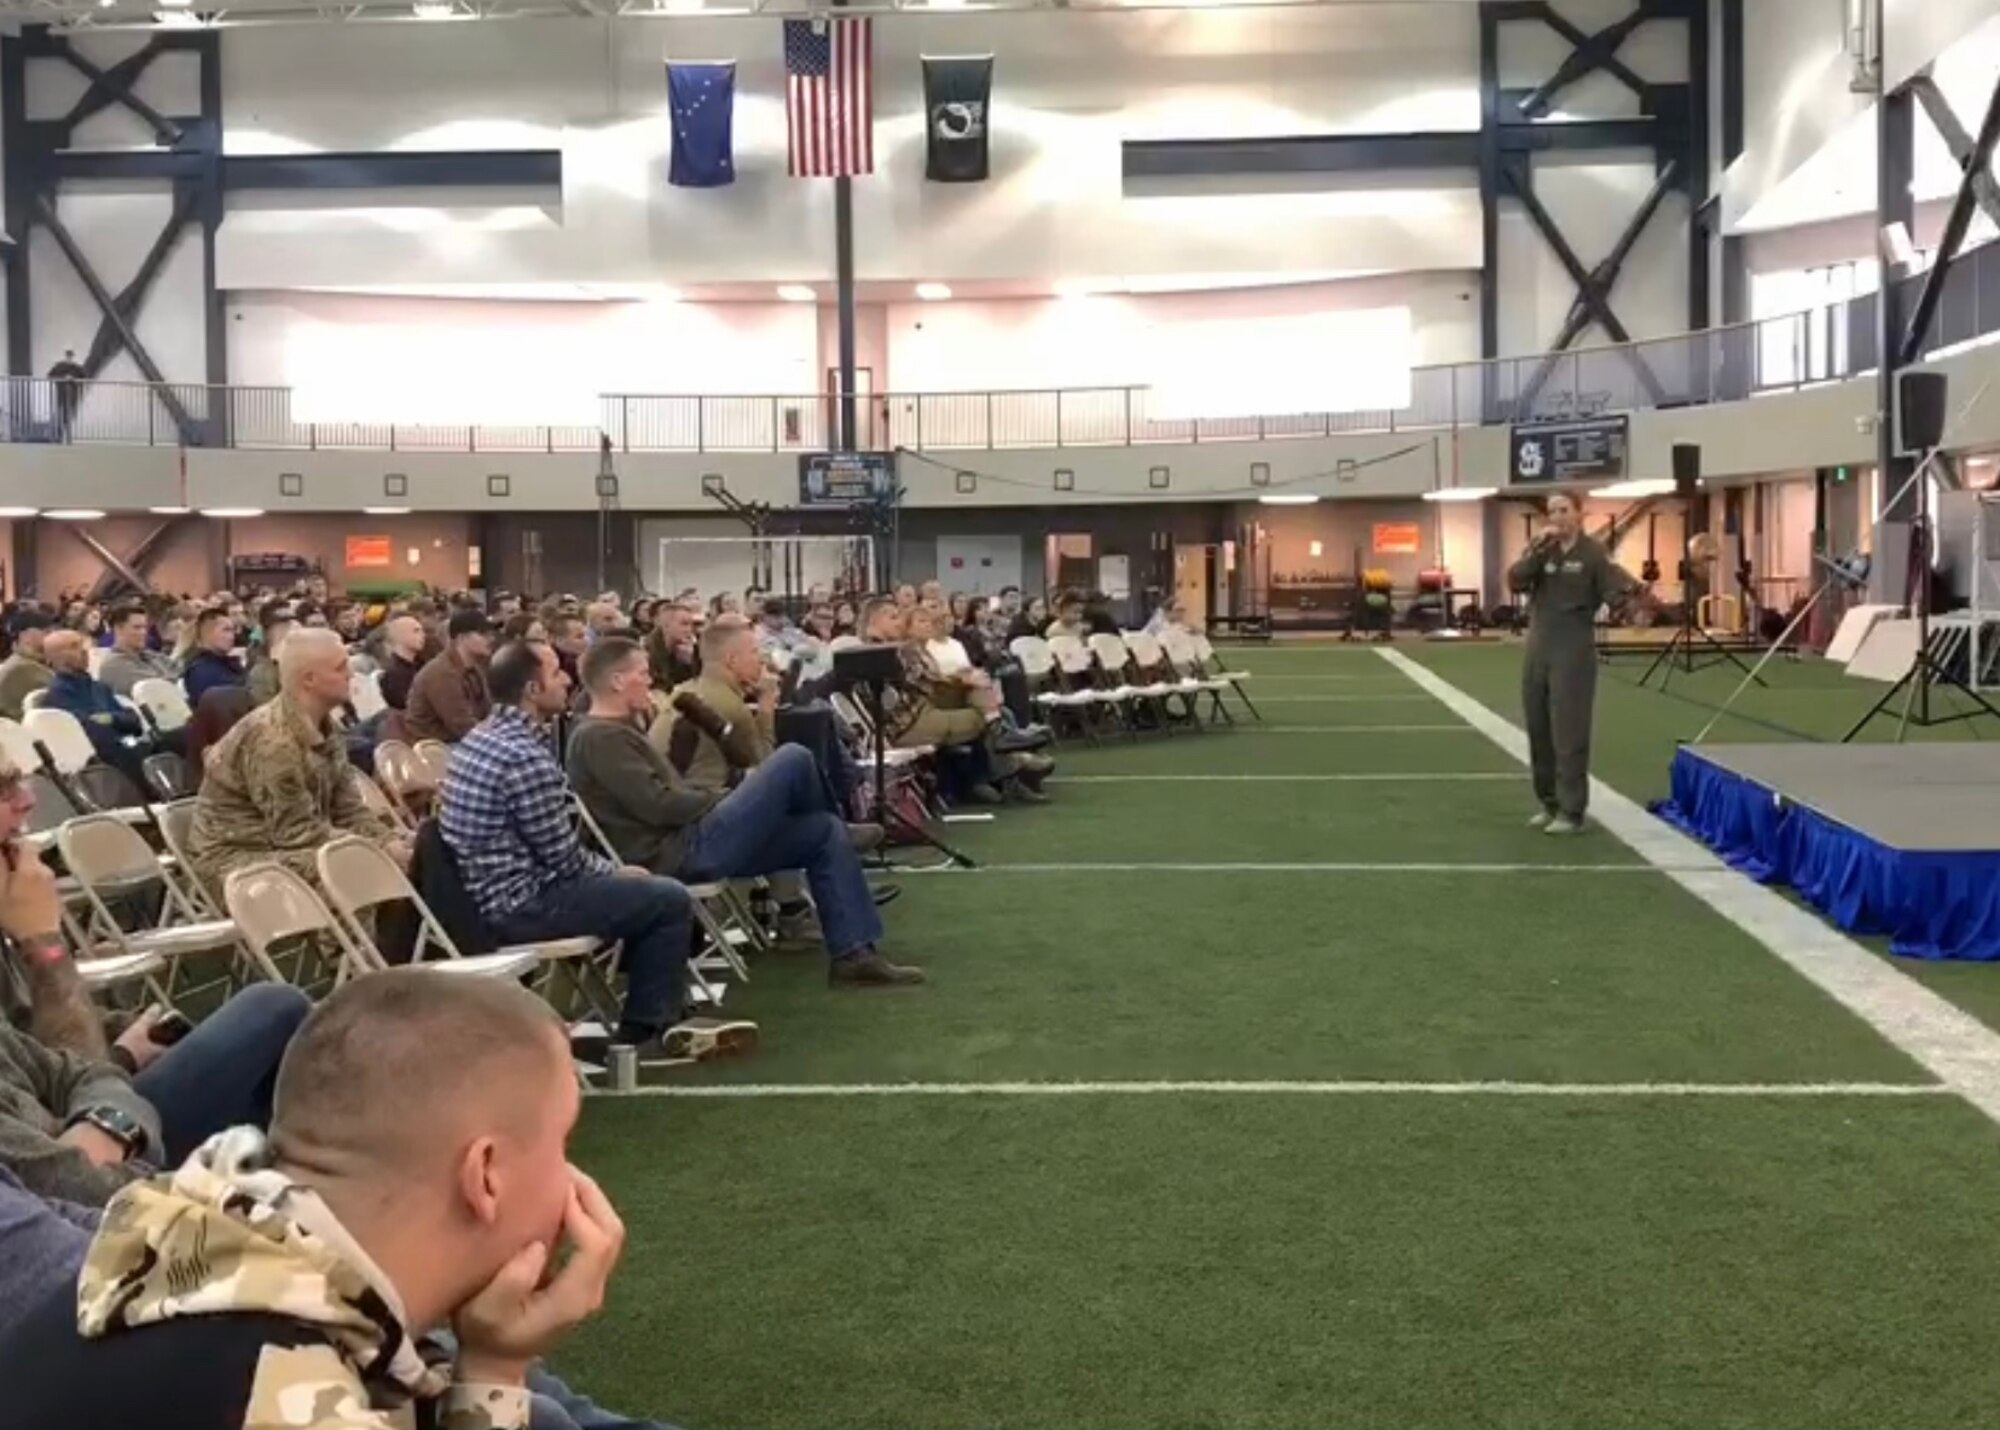 U.S. Air Force Capt. (Dr.) Regan Stiegmann, U.S. Air Force Academy performance medicine and lifestyle medicine physician, addresses the crowd during a resiliency day event at Eielson Air Force Base, Alaska, Oct. 18, 2019.